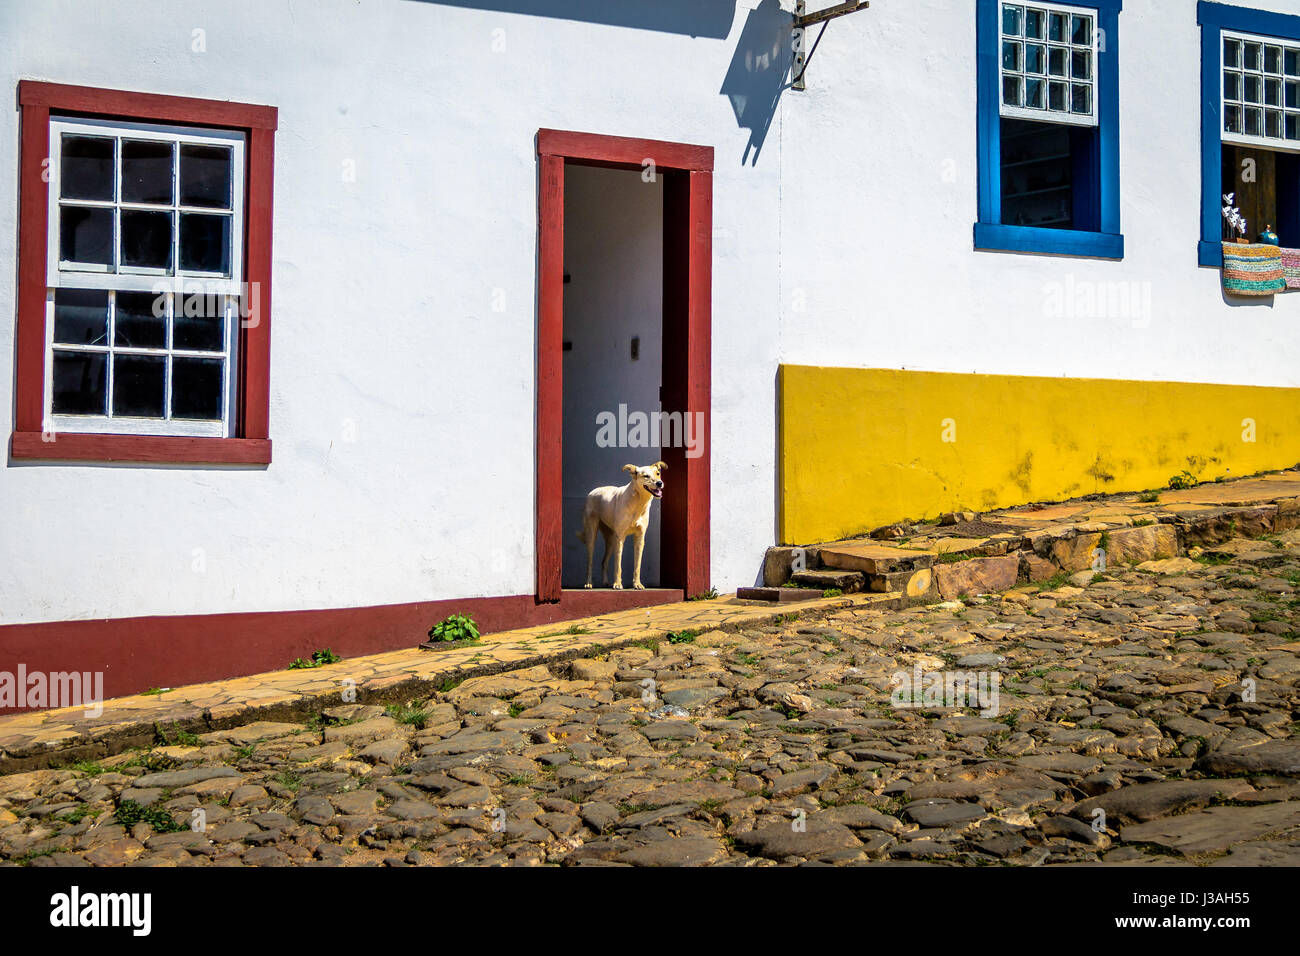 Dog in front of colorful colonial houses and cobblestone street - Tiradentes, Minas Gerais, Brazil Stock Photo